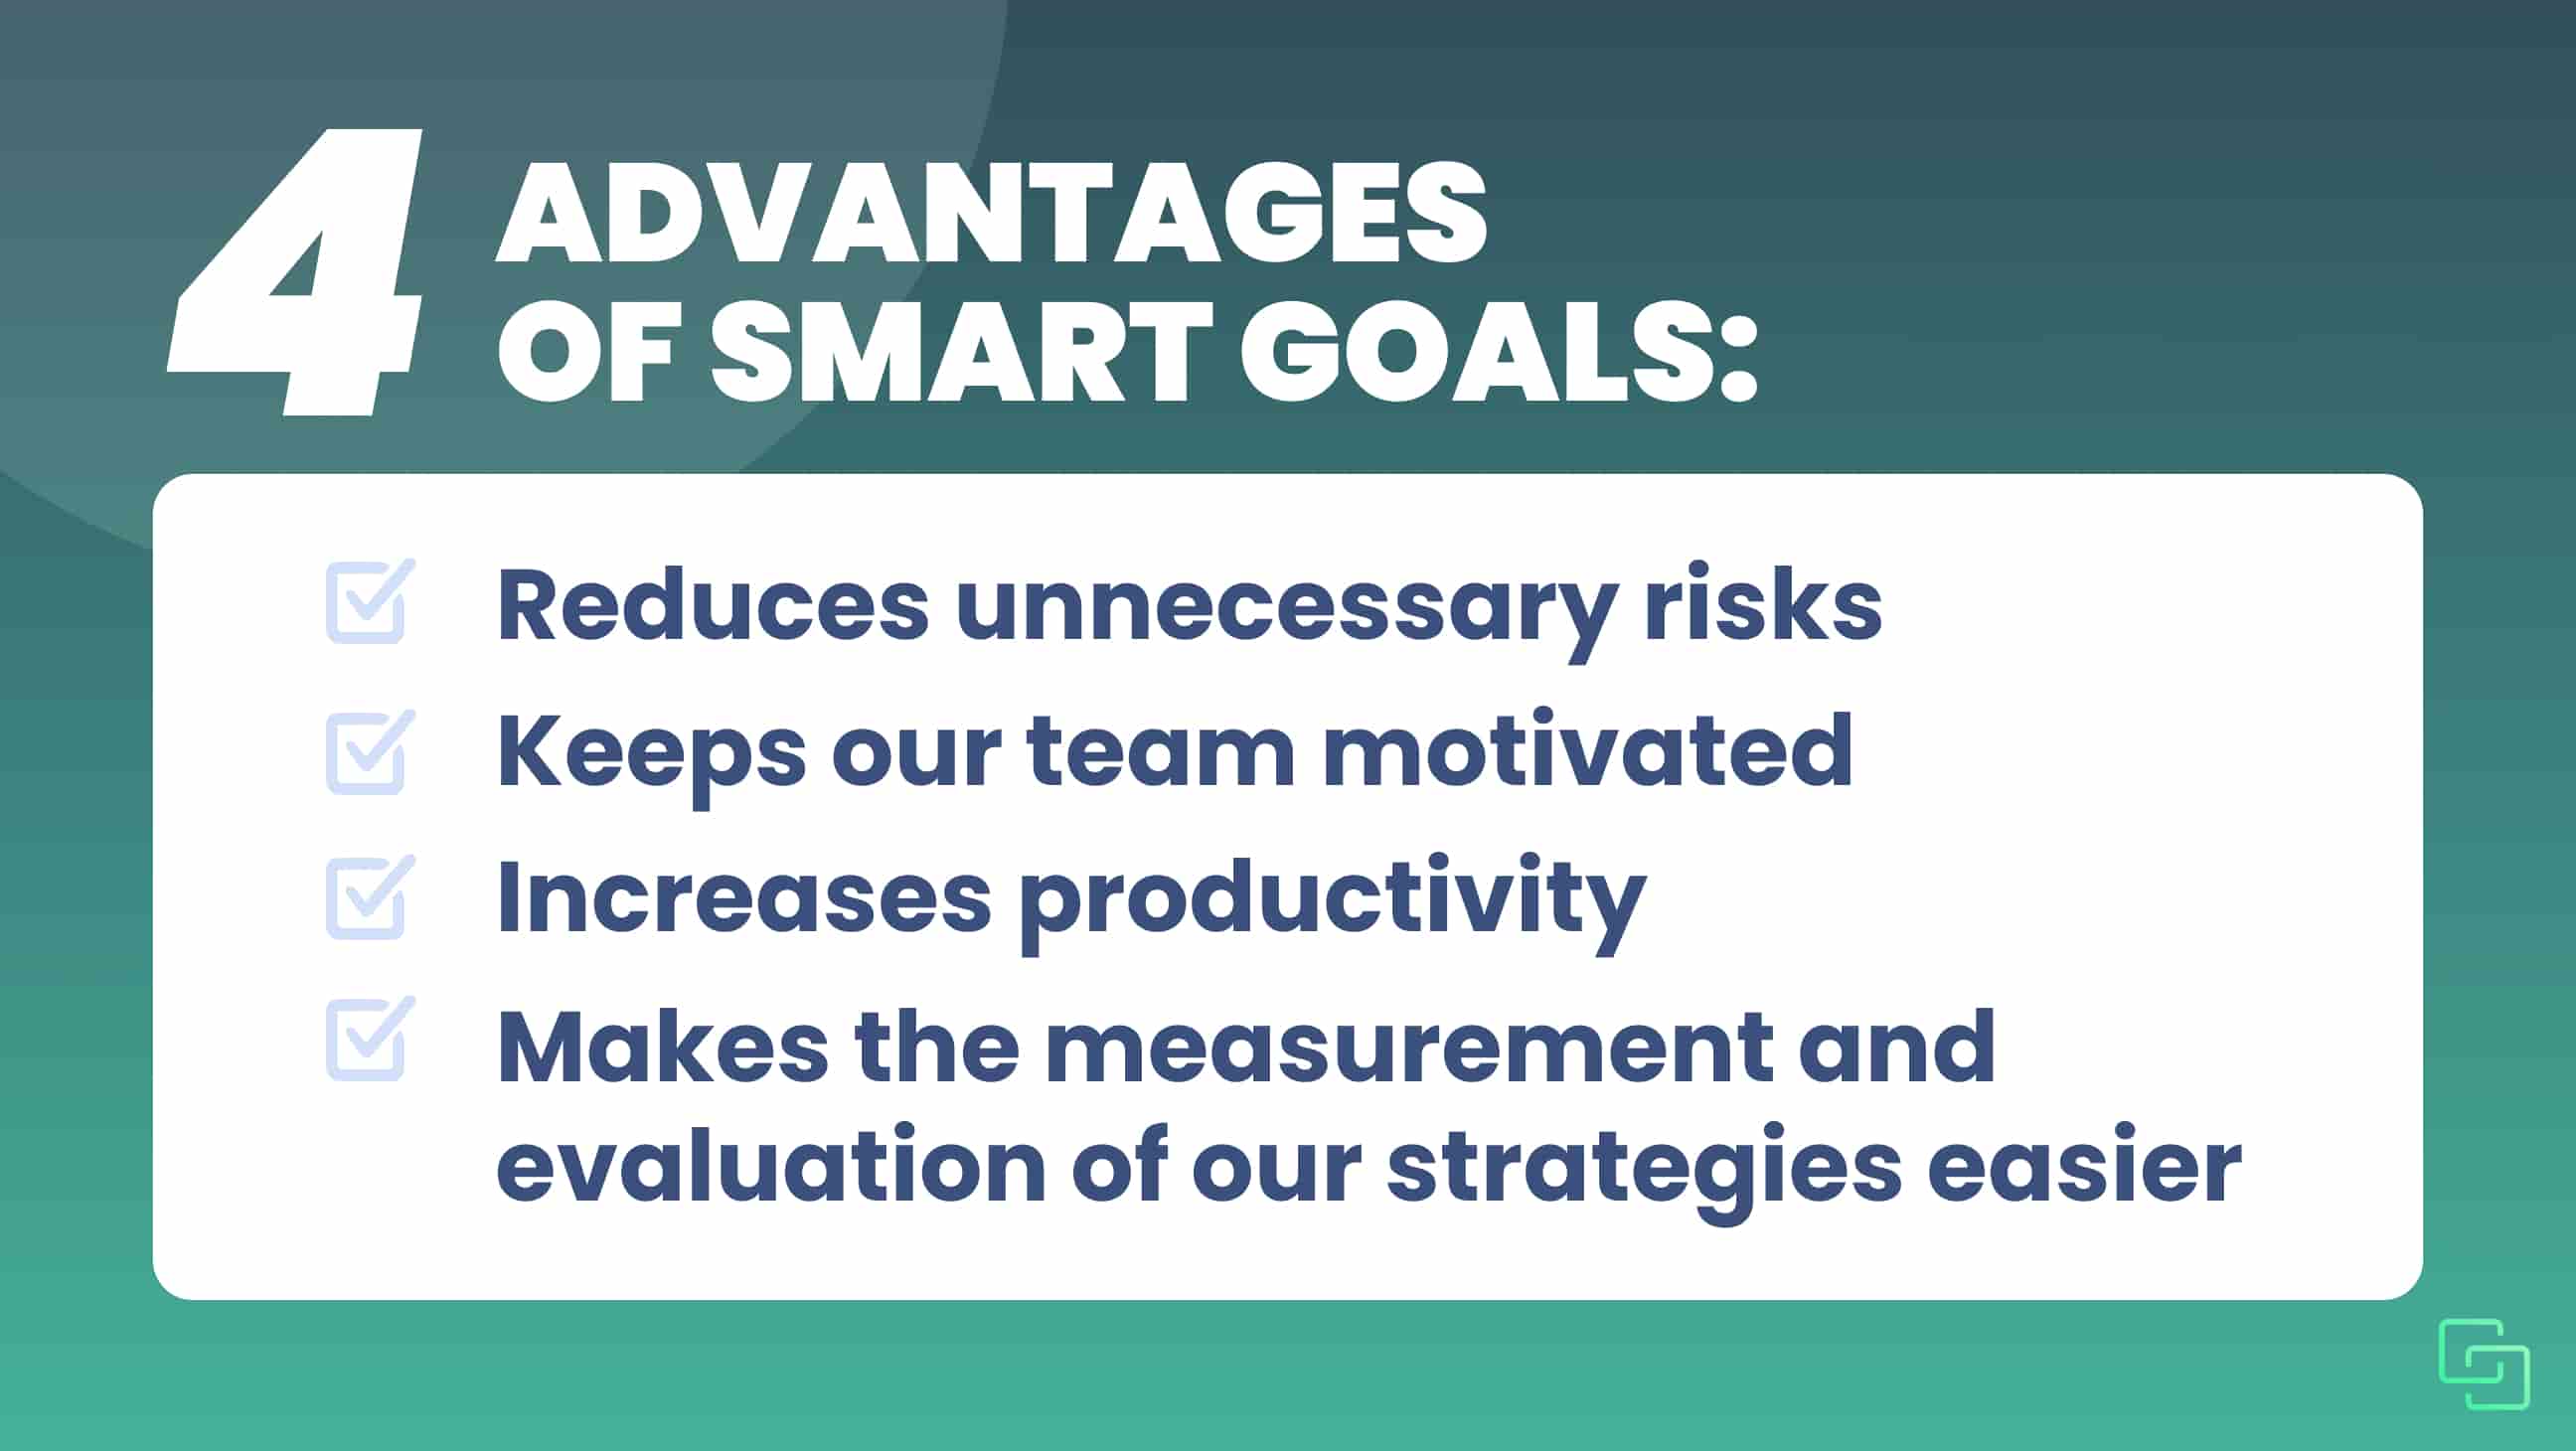 SMART Goals in Education: Importance, Benefits, Limitations